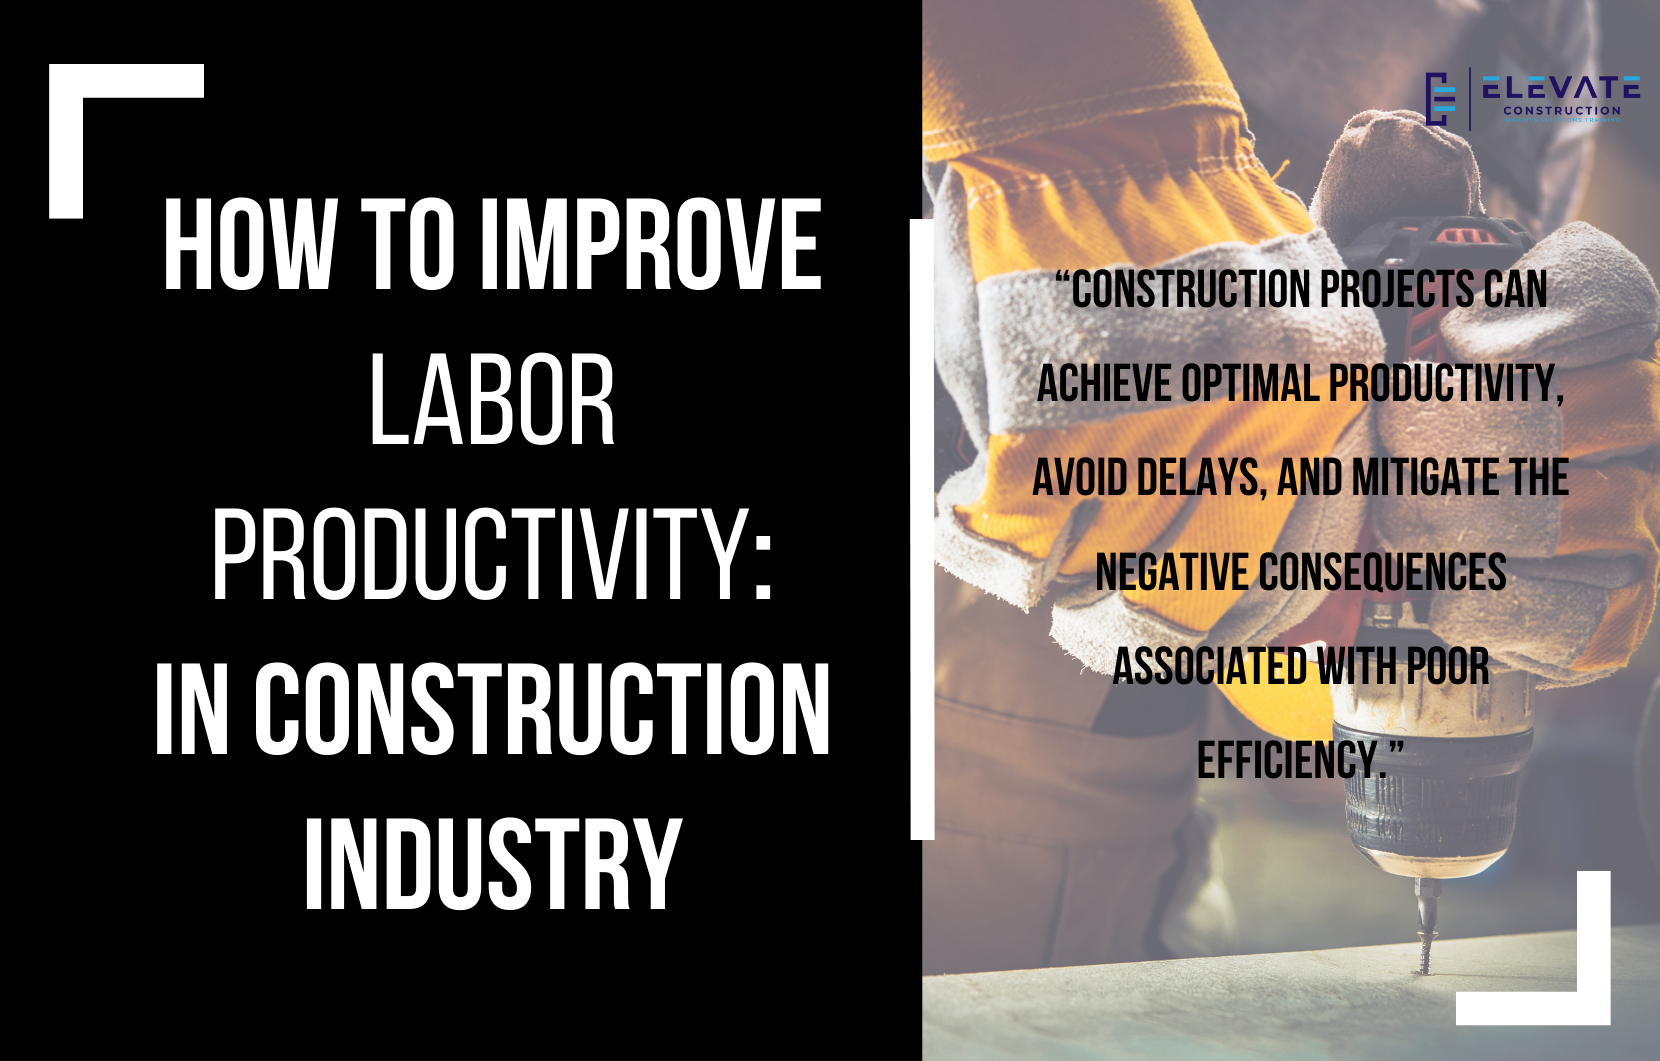 How To Improve Labor Productivity In Construction Industry